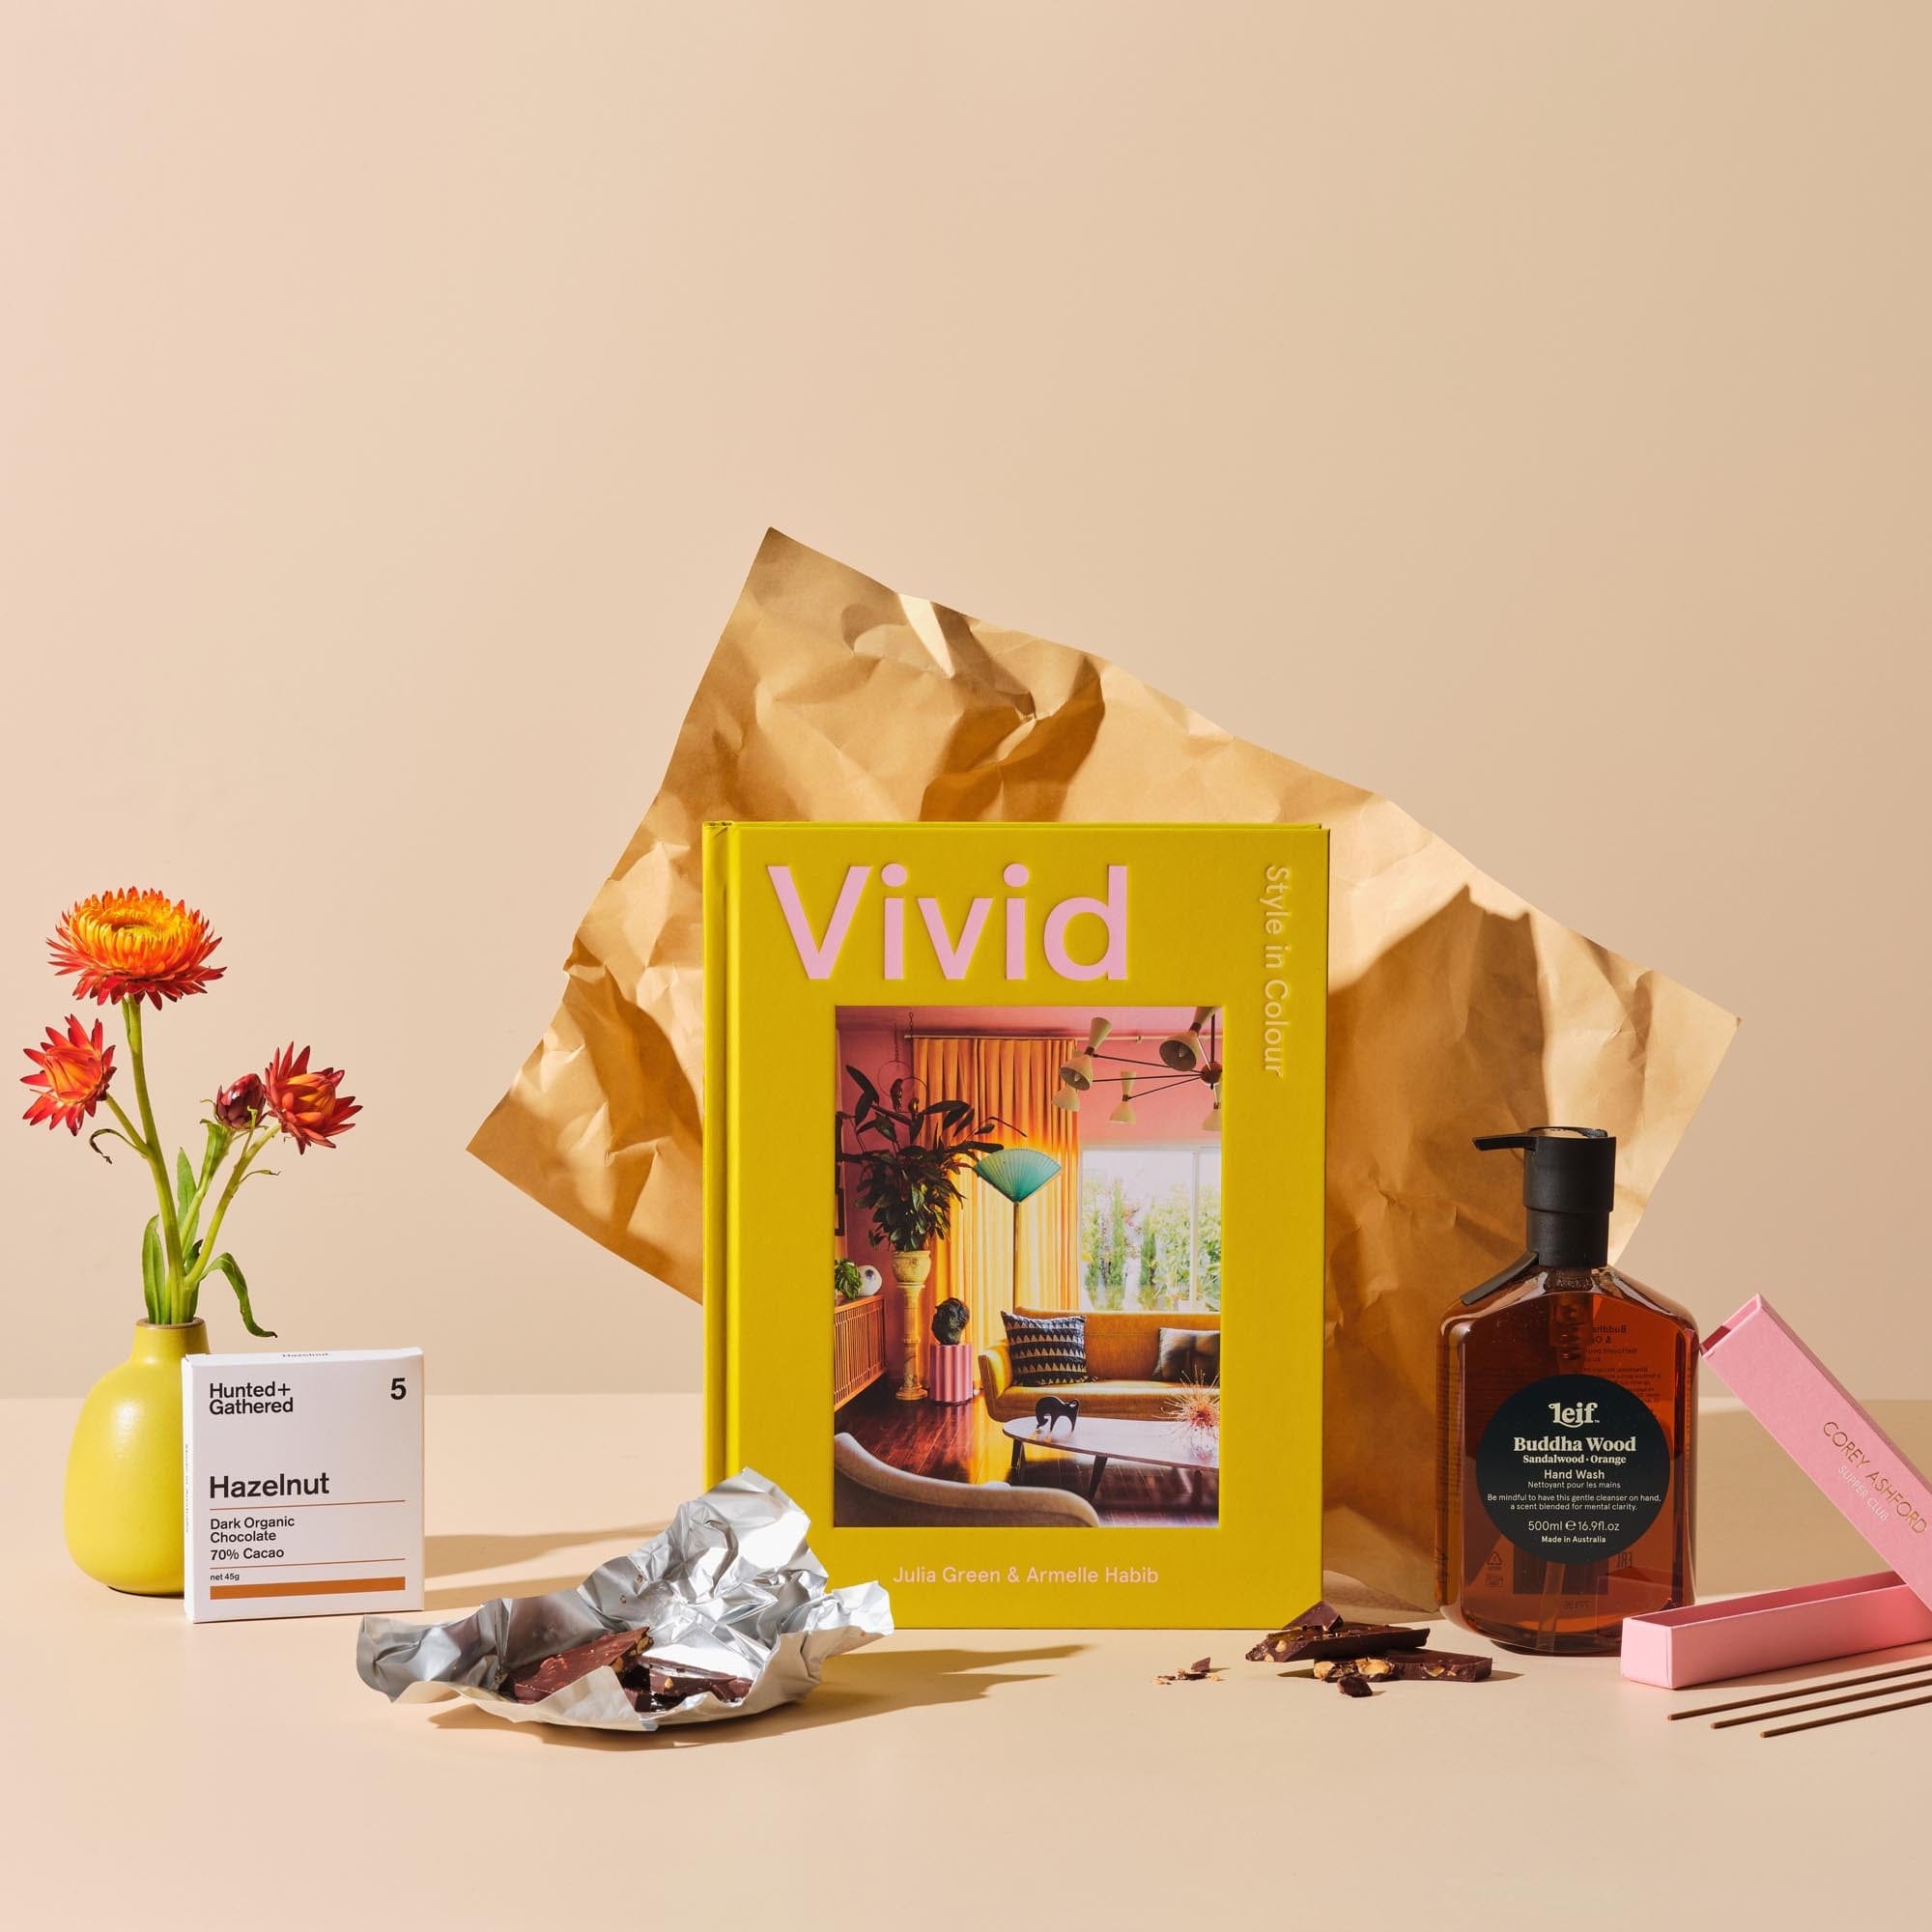 This is the Happy Place bundle from Handsel. Included in this image is Vivid, Dark chocolate, April Blossom Candle, Buddha Wood hand wash and Incense